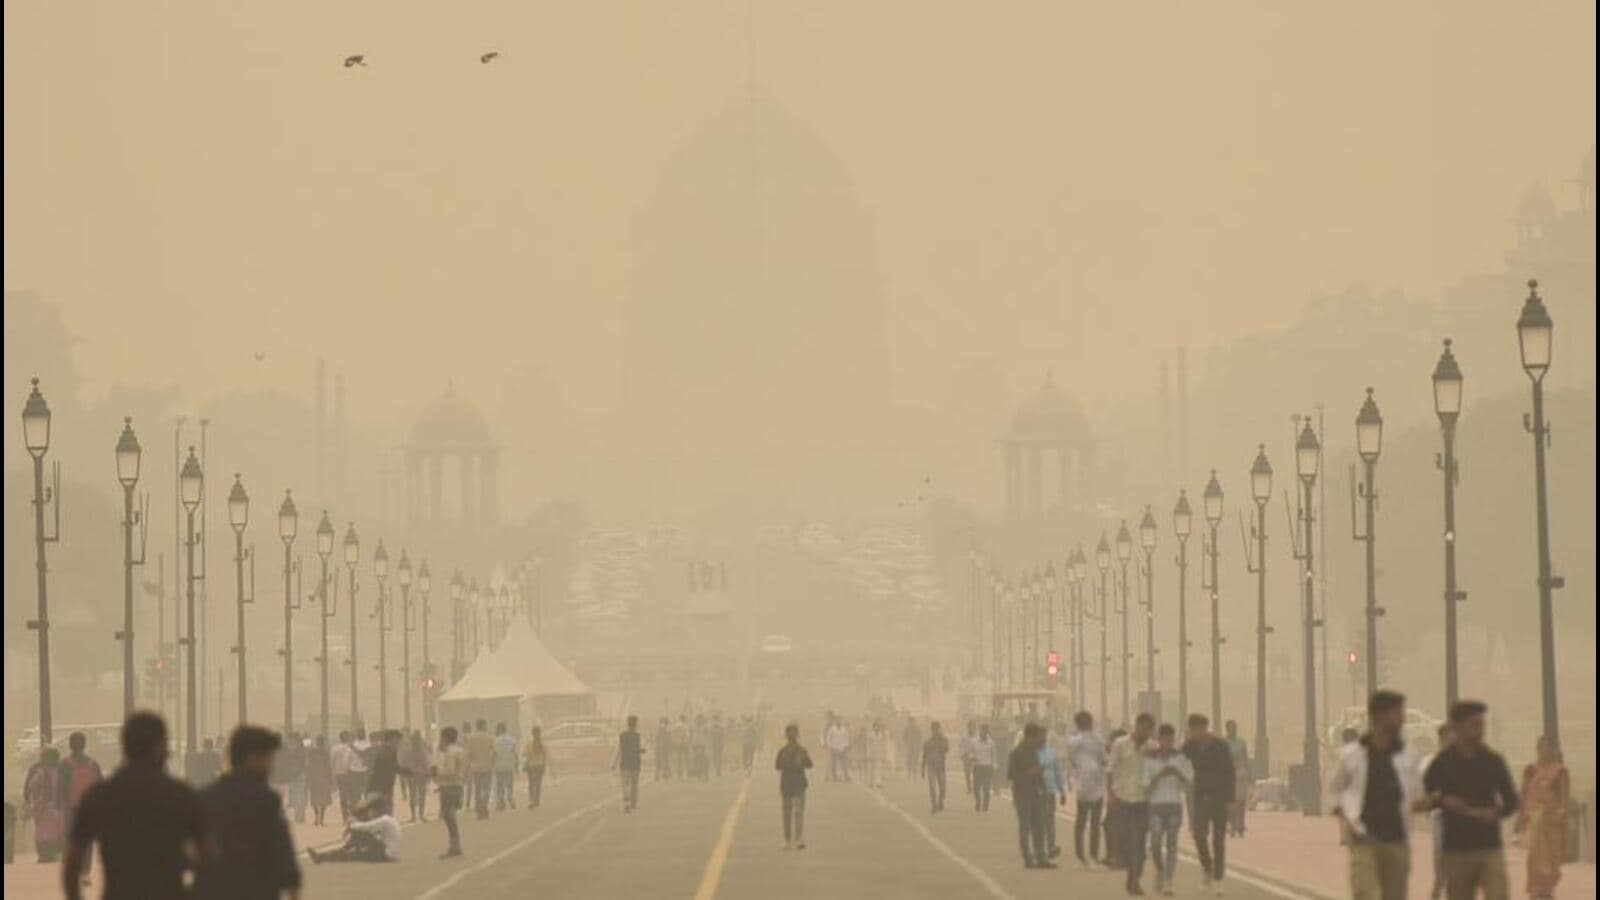 Delhis Pollution Levels Can Have Lasting Health Effects Latest News India Hindustan Times 7255